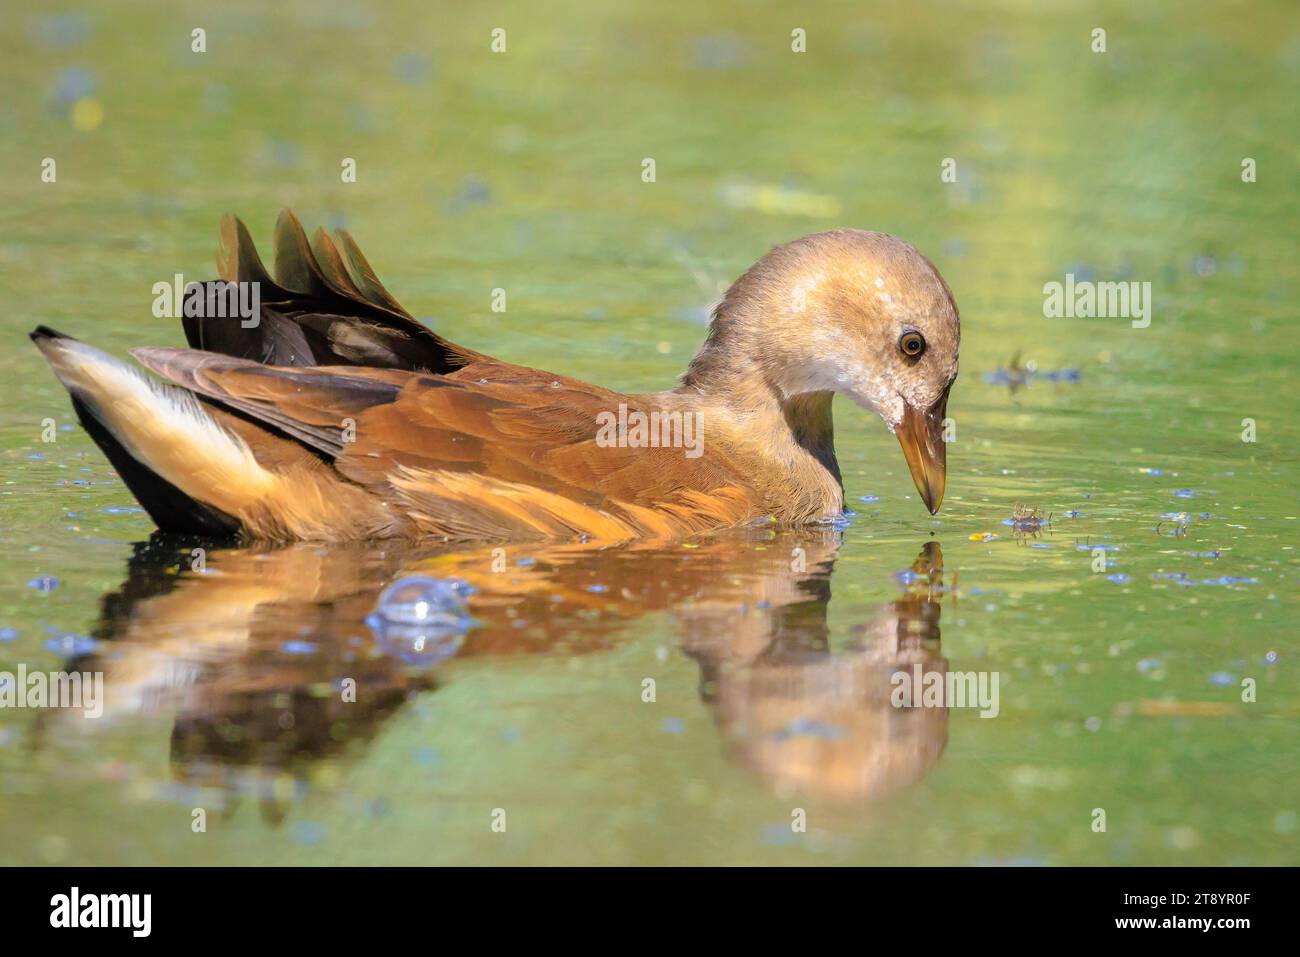 Close-up of a Young common moorhen, Gallinula chloropus, swimming in a pond on the water surface. The background is green, selective focus is used. Stock Photo